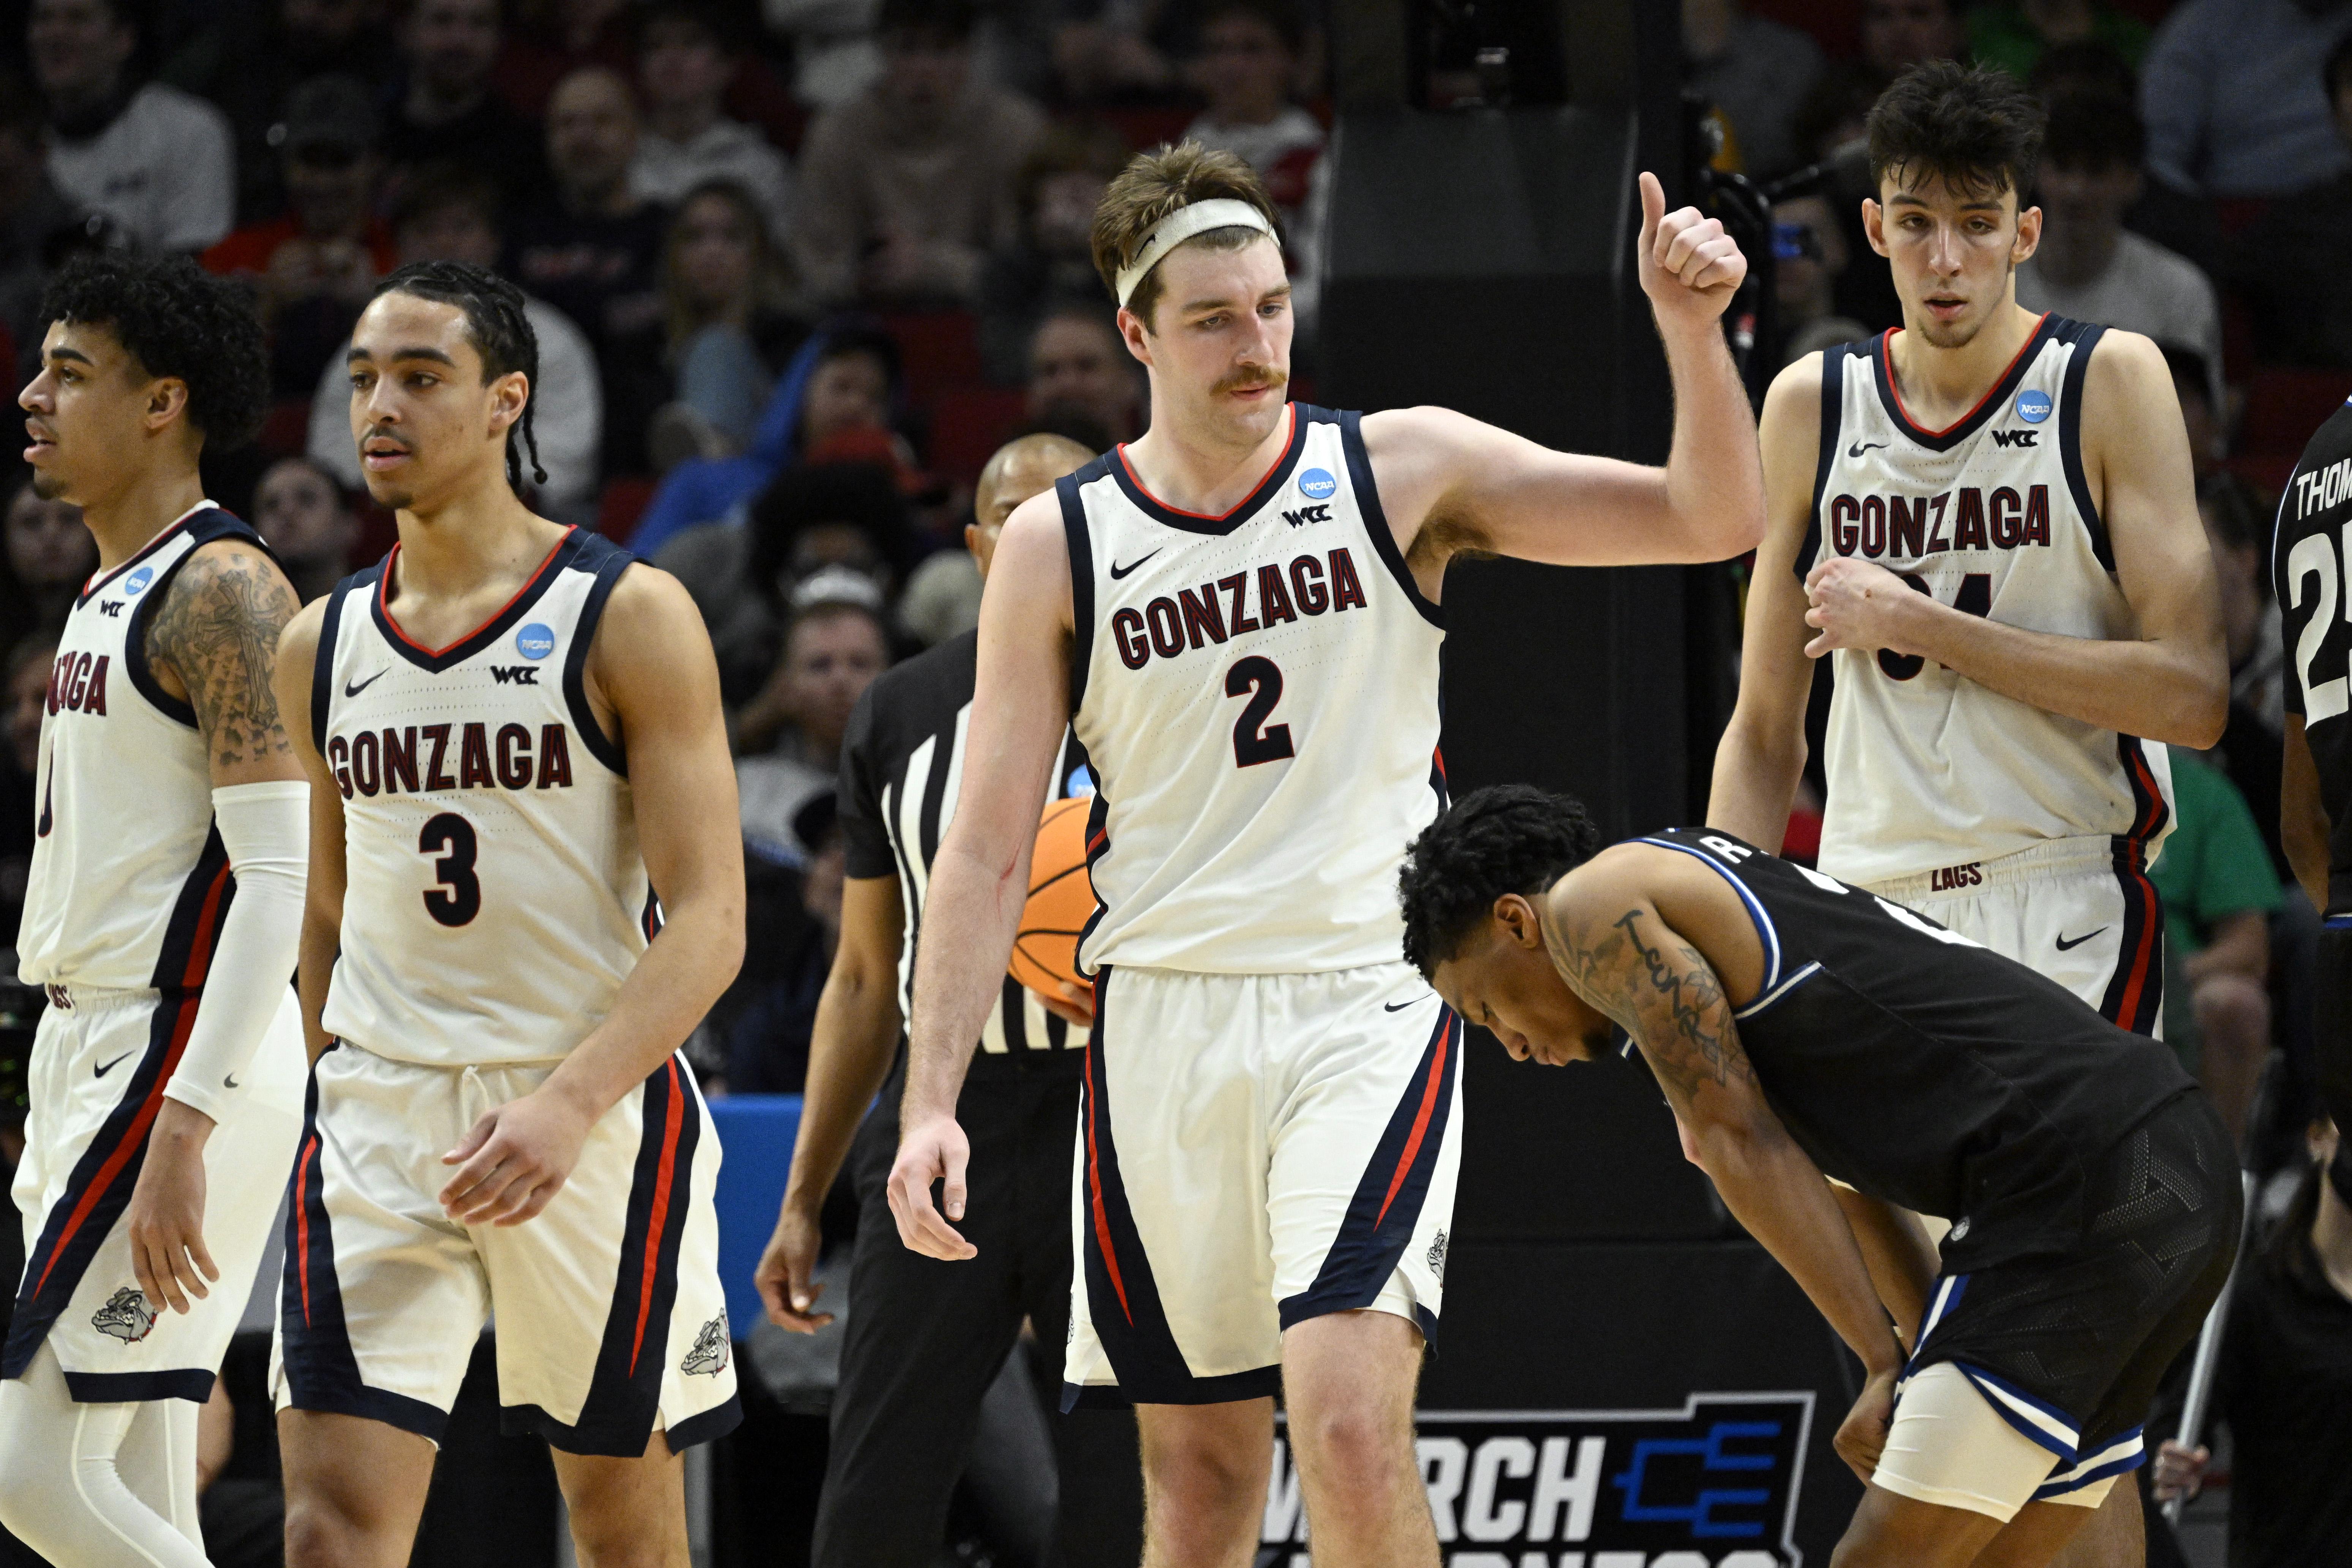 Gonzaga NCAA Tournament History: National Championships, All-Time Record, Best March Madness Results & More